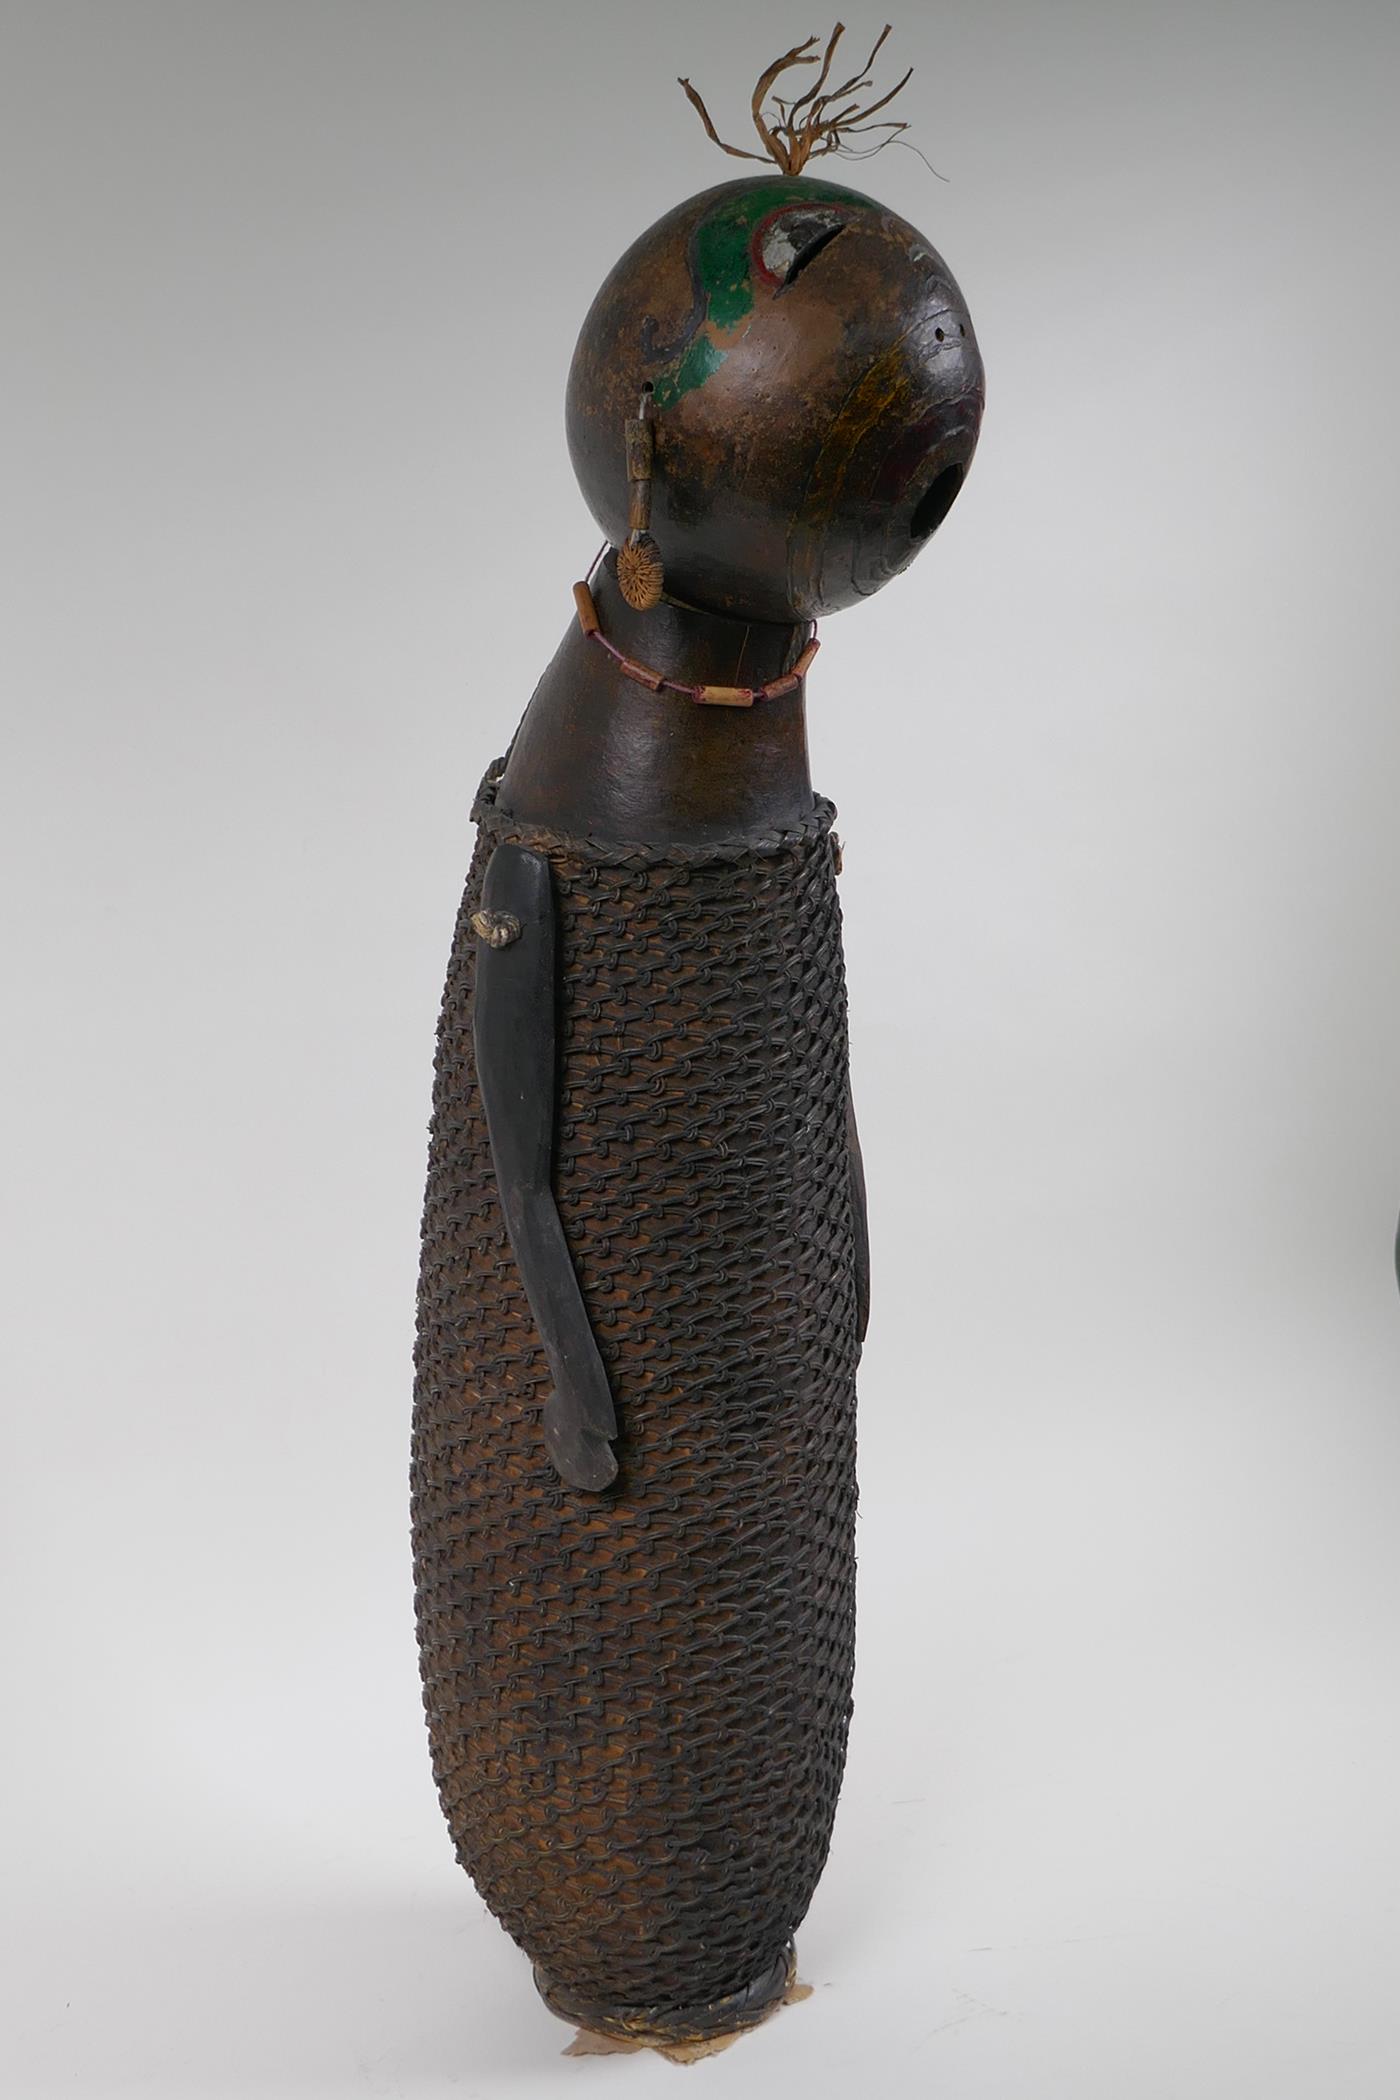 An African basket work and hollowed gourd doll with painted details, possibly Congolese, 59cm high - Image 3 of 3